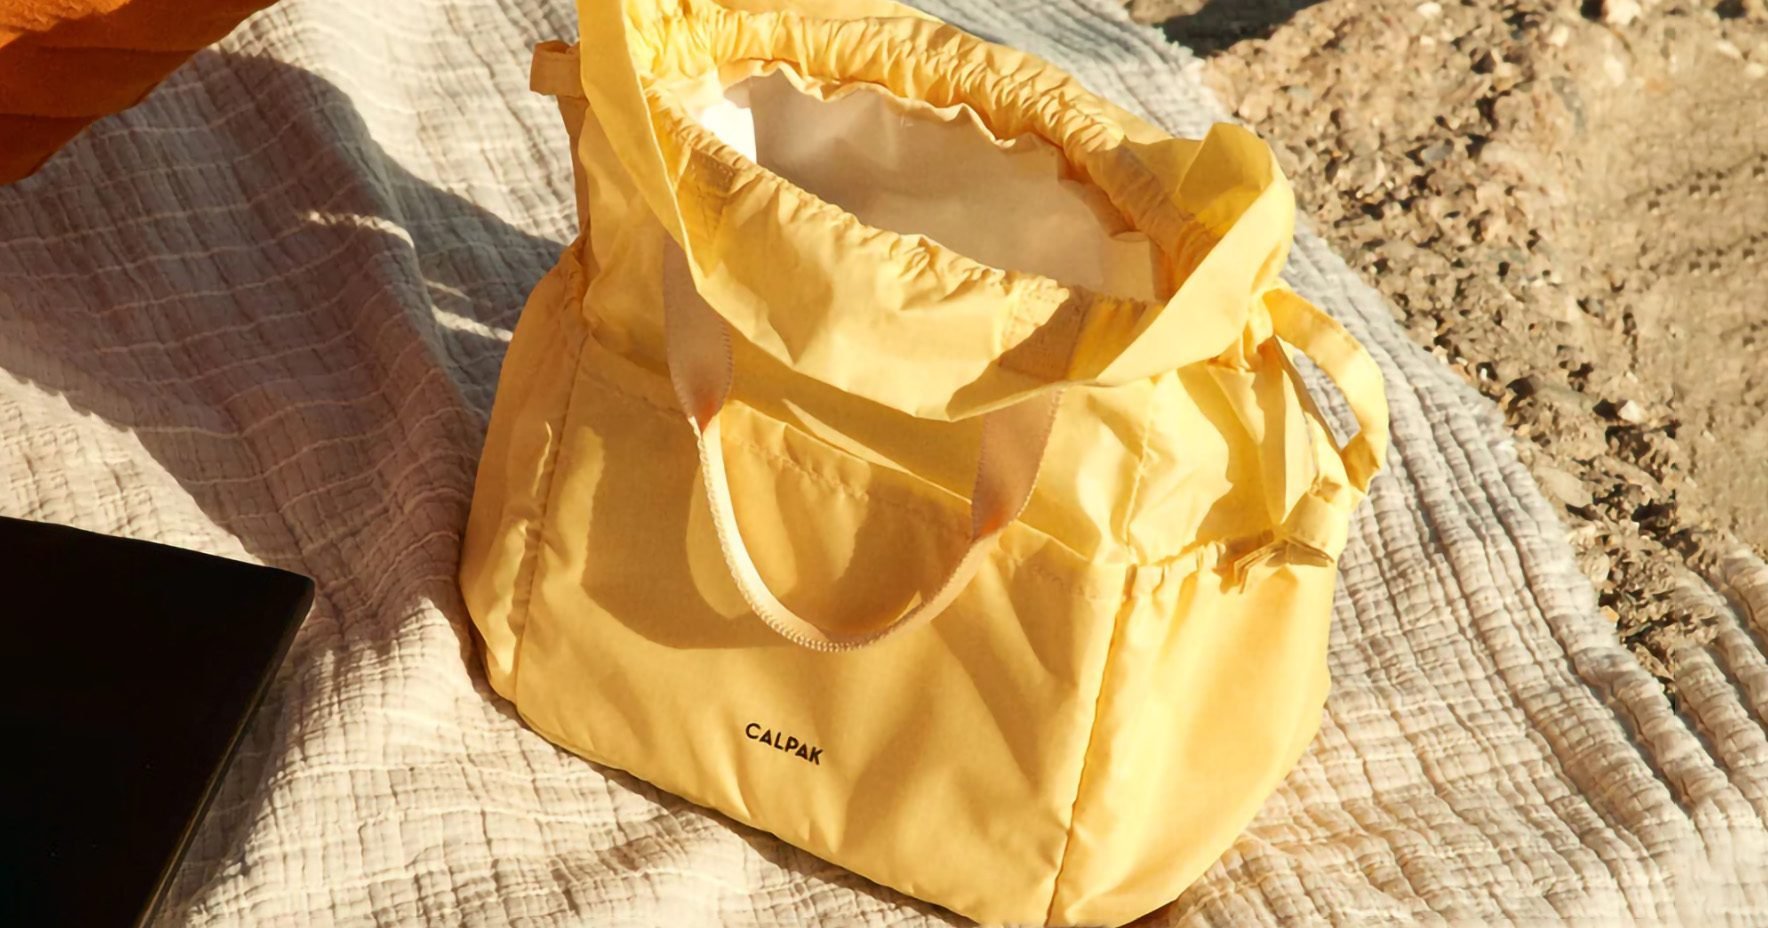 25 Best Luxury lunch bags and others ideas